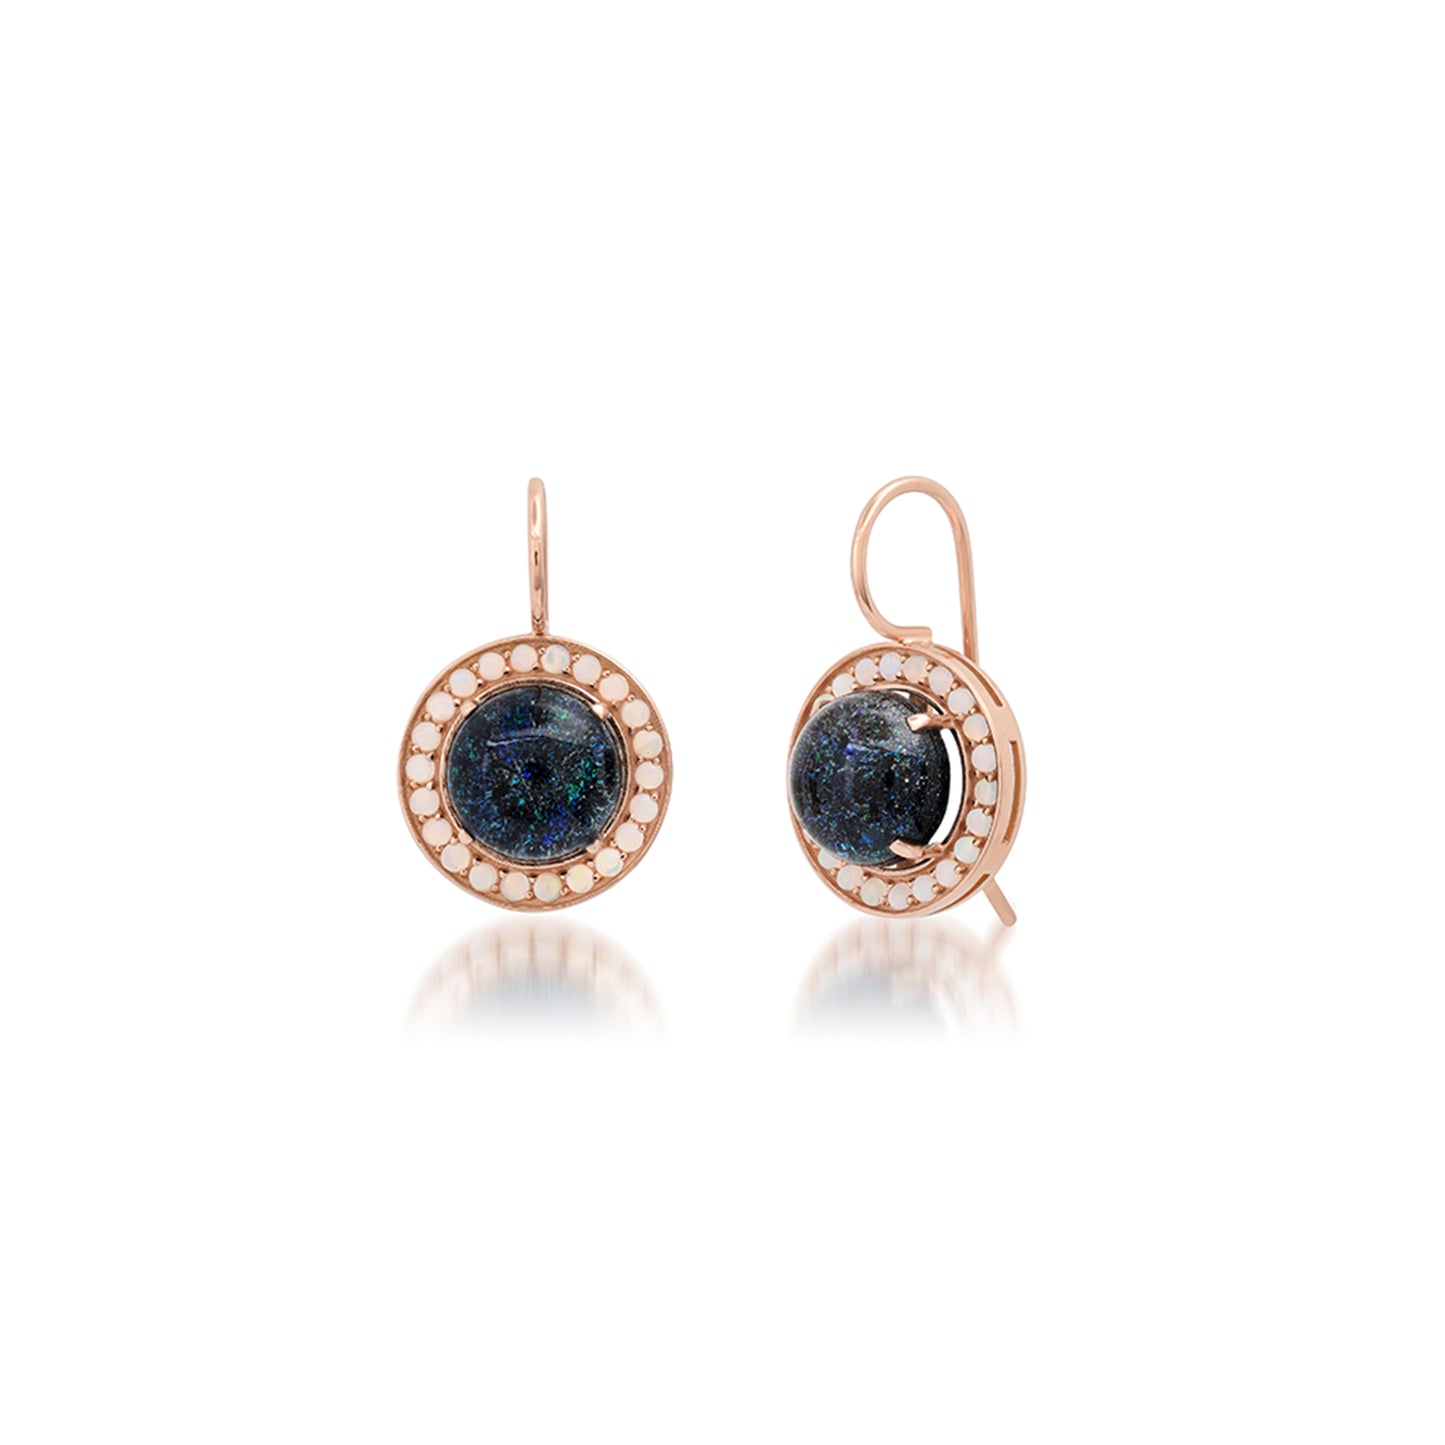 Round Black Opal Earrings with White Opal Trim